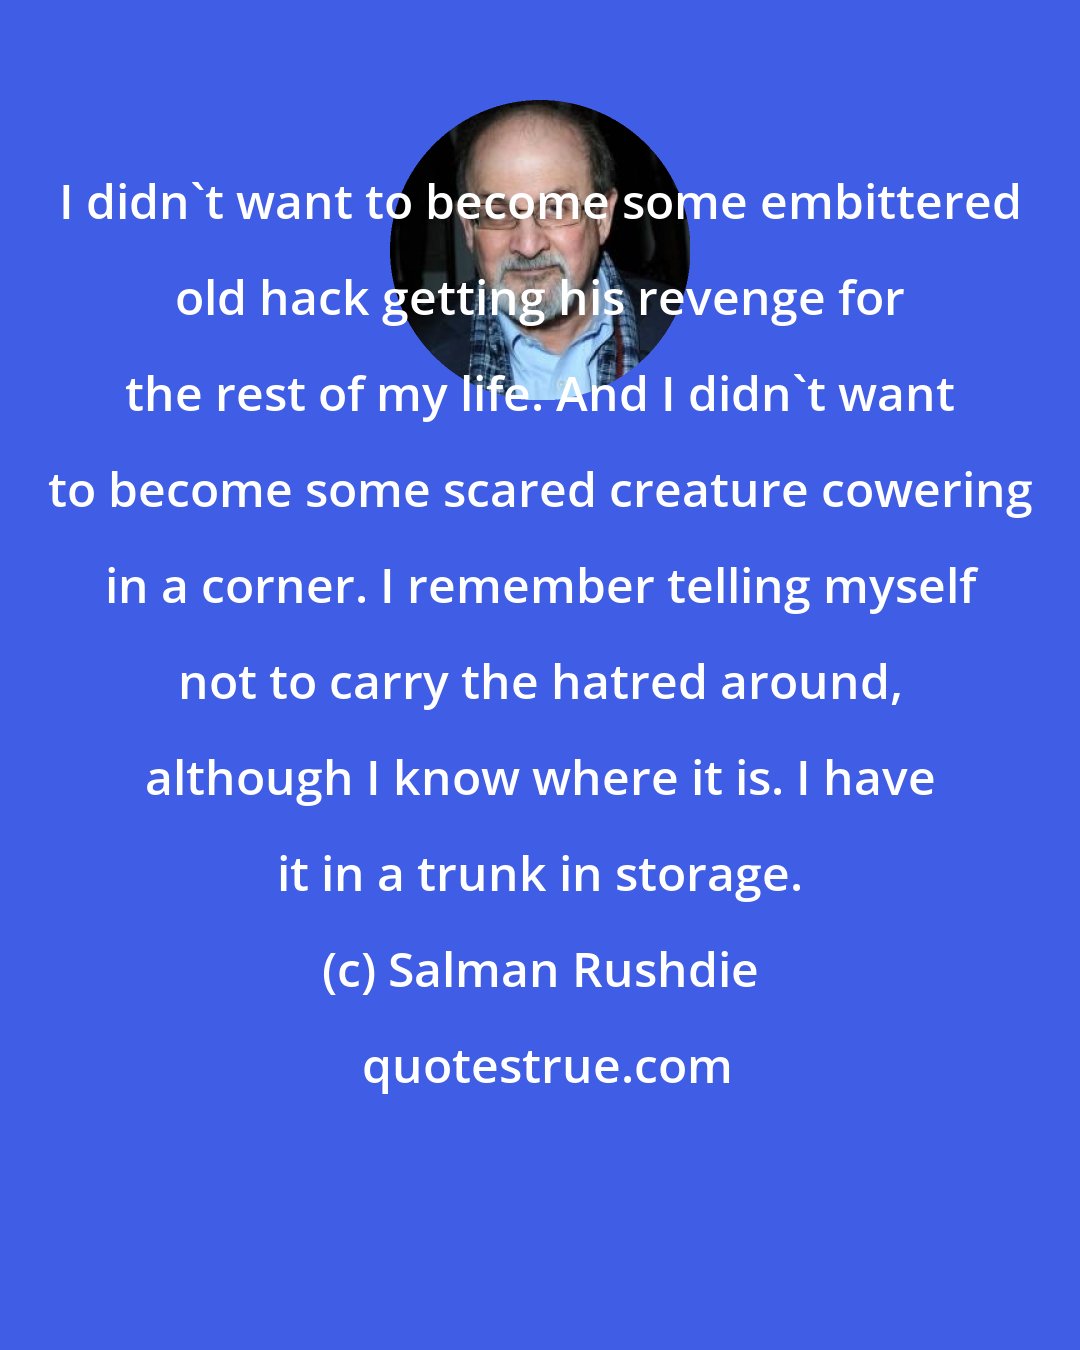 Salman Rushdie: I didn't want to become some embittered old hack getting his revenge for the rest of my life. And I didn't want to become some scared creature cowering in a corner. I remember telling myself not to carry the hatred around, although I know where it is. I have it in a trunk in storage.